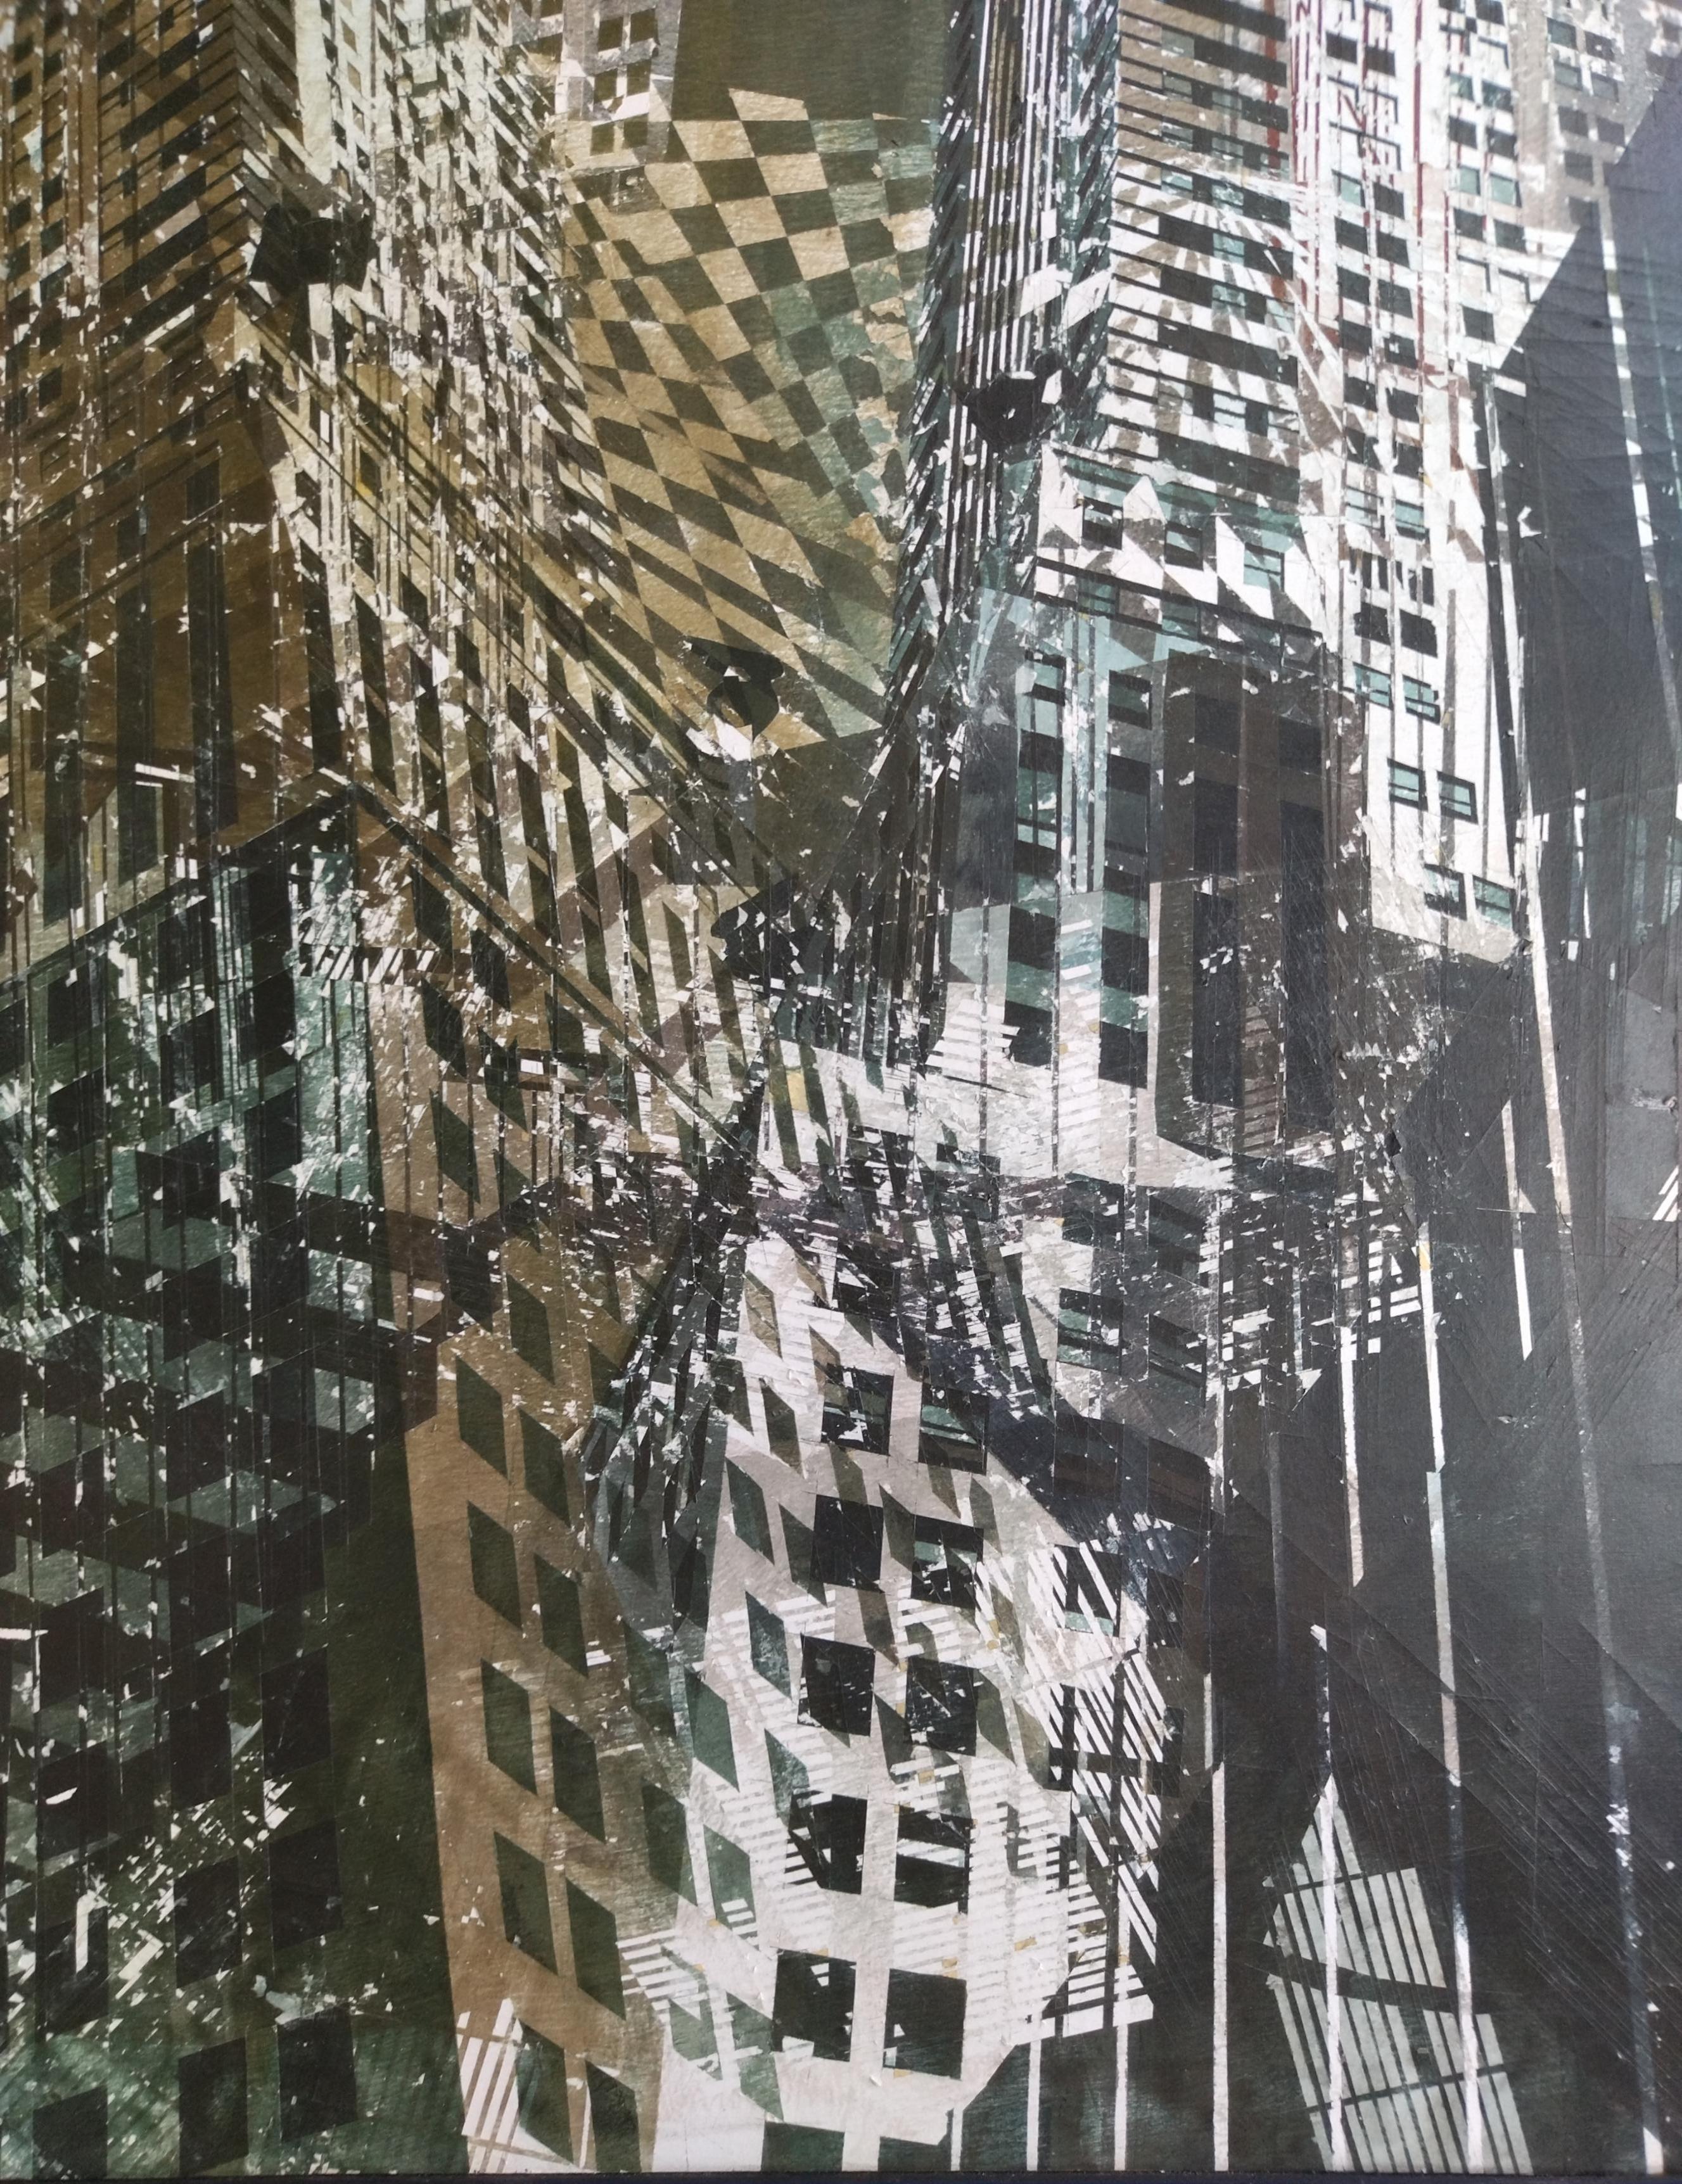 Luis Fernandez  Chrysler Buildings NY acrylic and watercolor glued on canvas. 
Luis J. Fernández was born in Blanca (Murcia) in 1974.
The urban landscapes conceived by this artist break the laws of space and time unifying figuration and